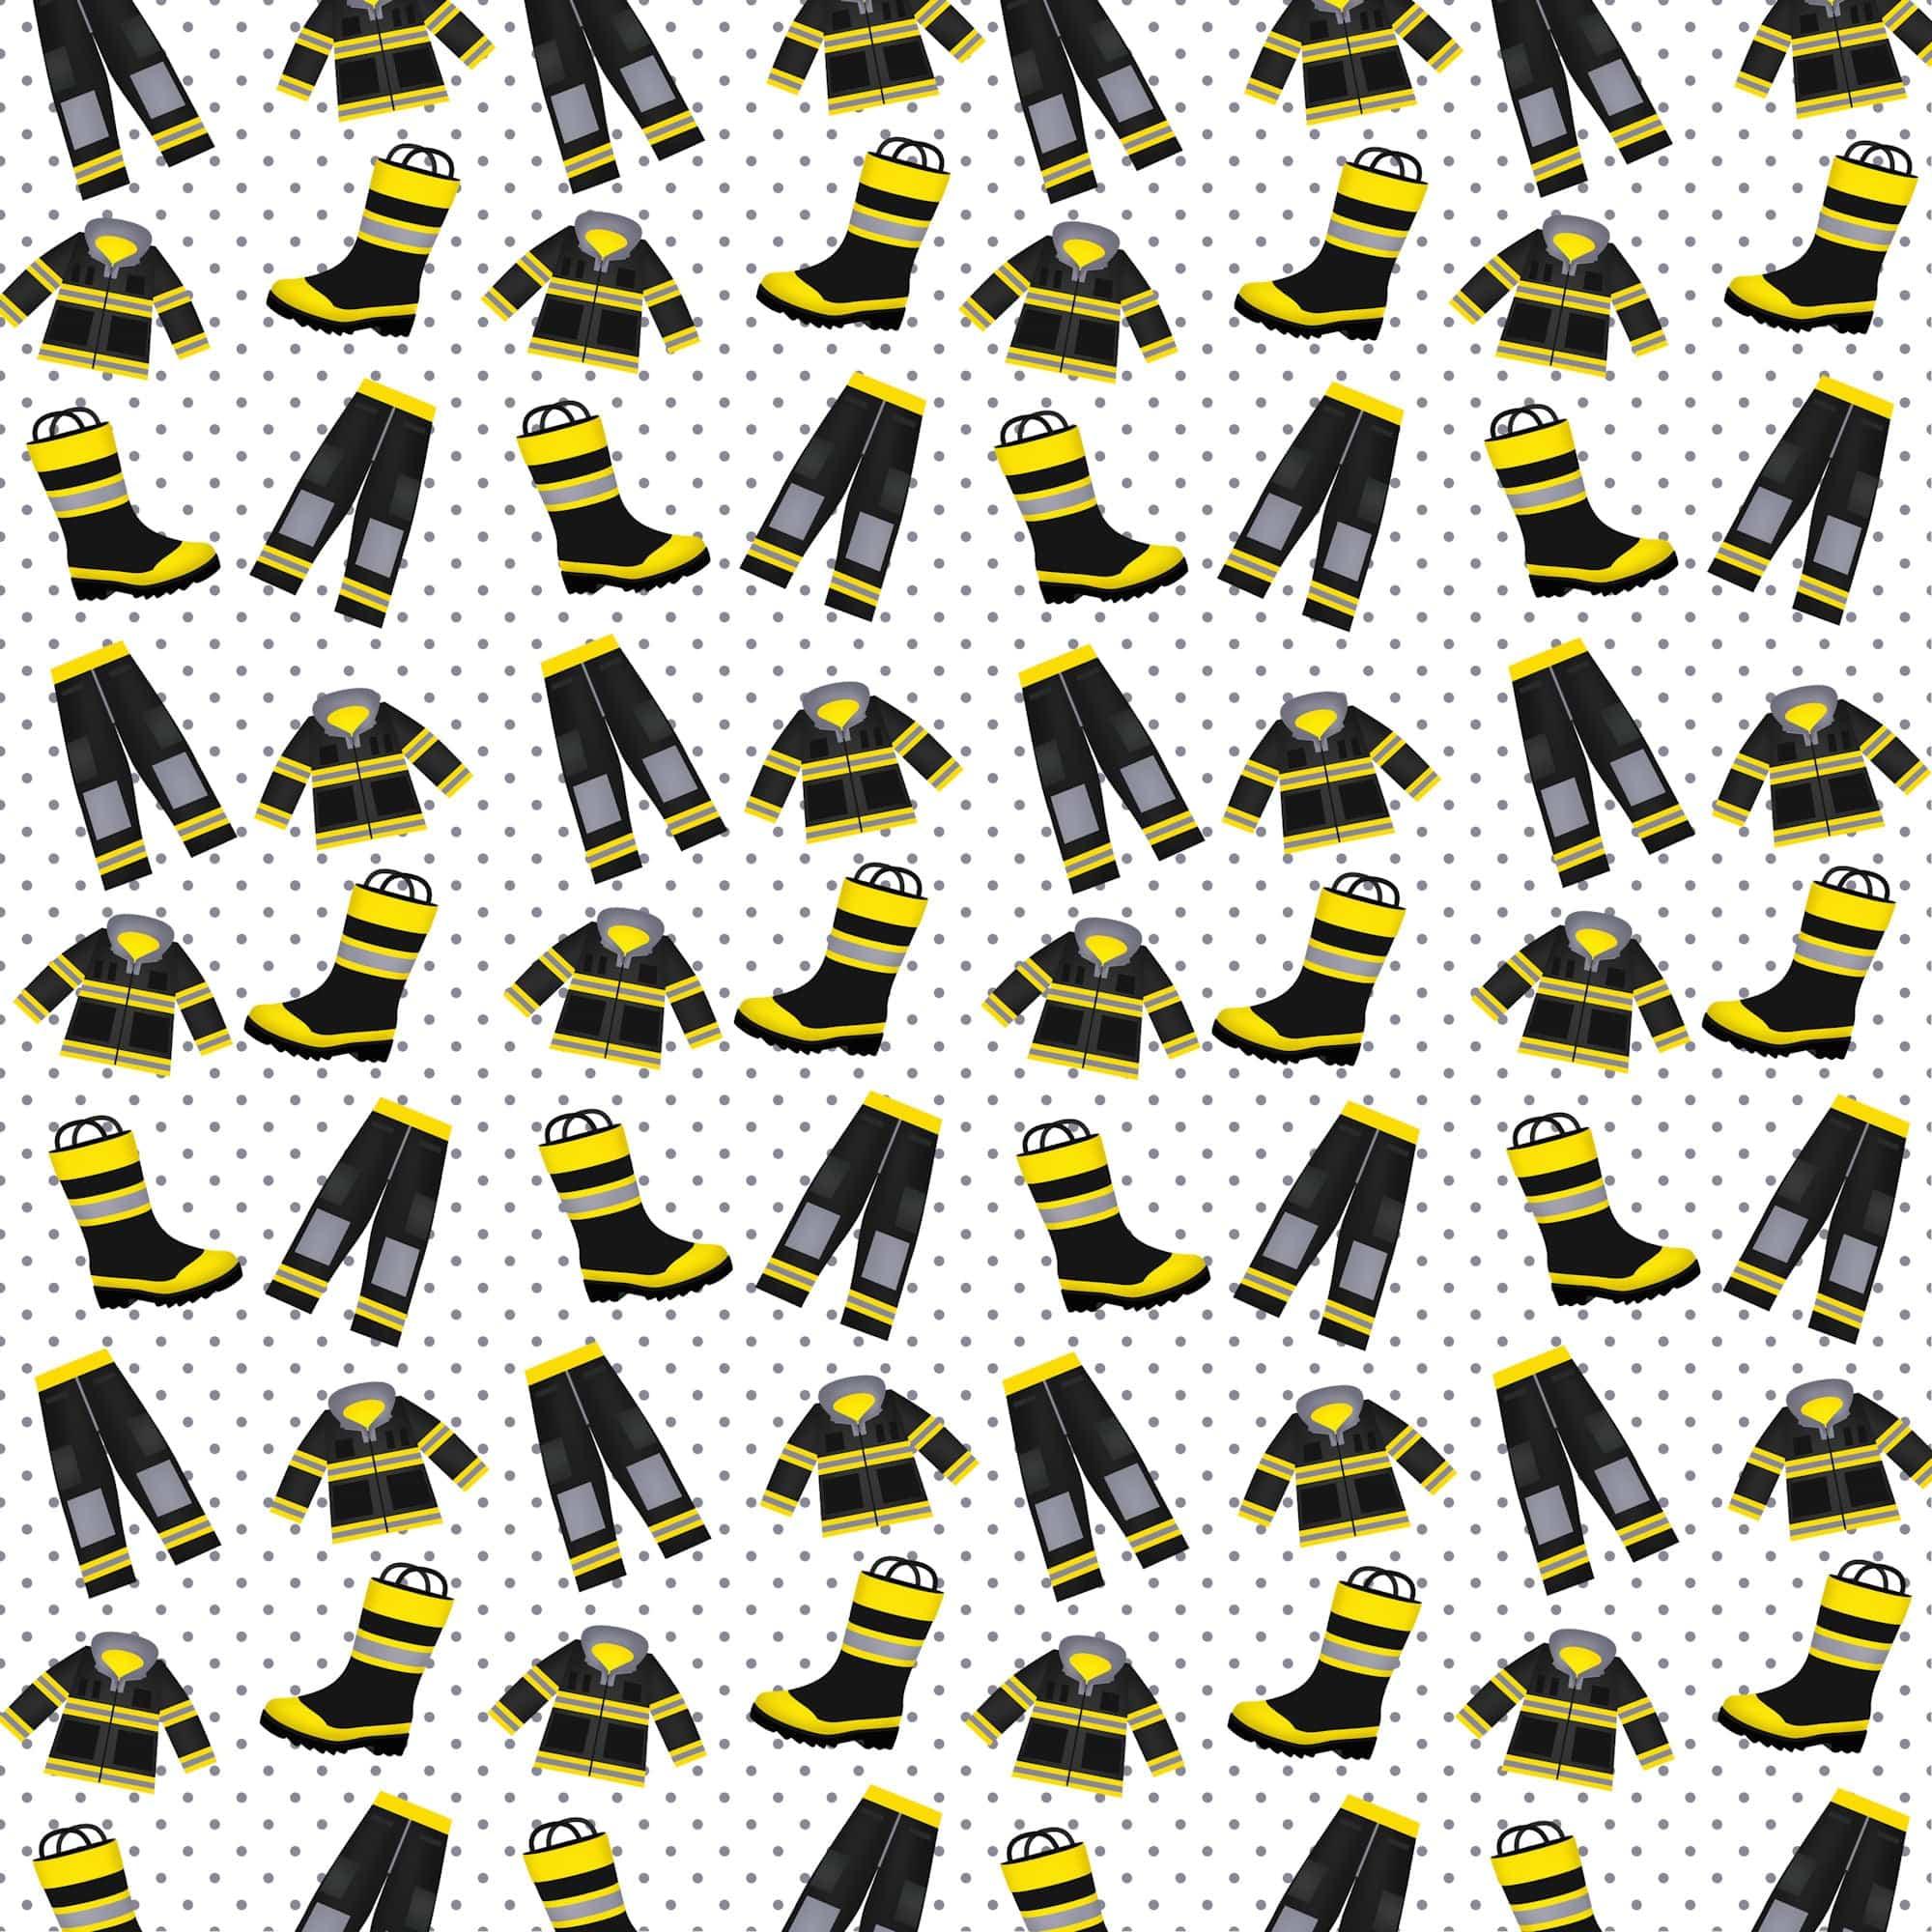 Occupation Collection Firefighter Uniform 12 x 12 Double-Sided Scrapbook Paper by SSC Designs - Scrapbook Supply Companies